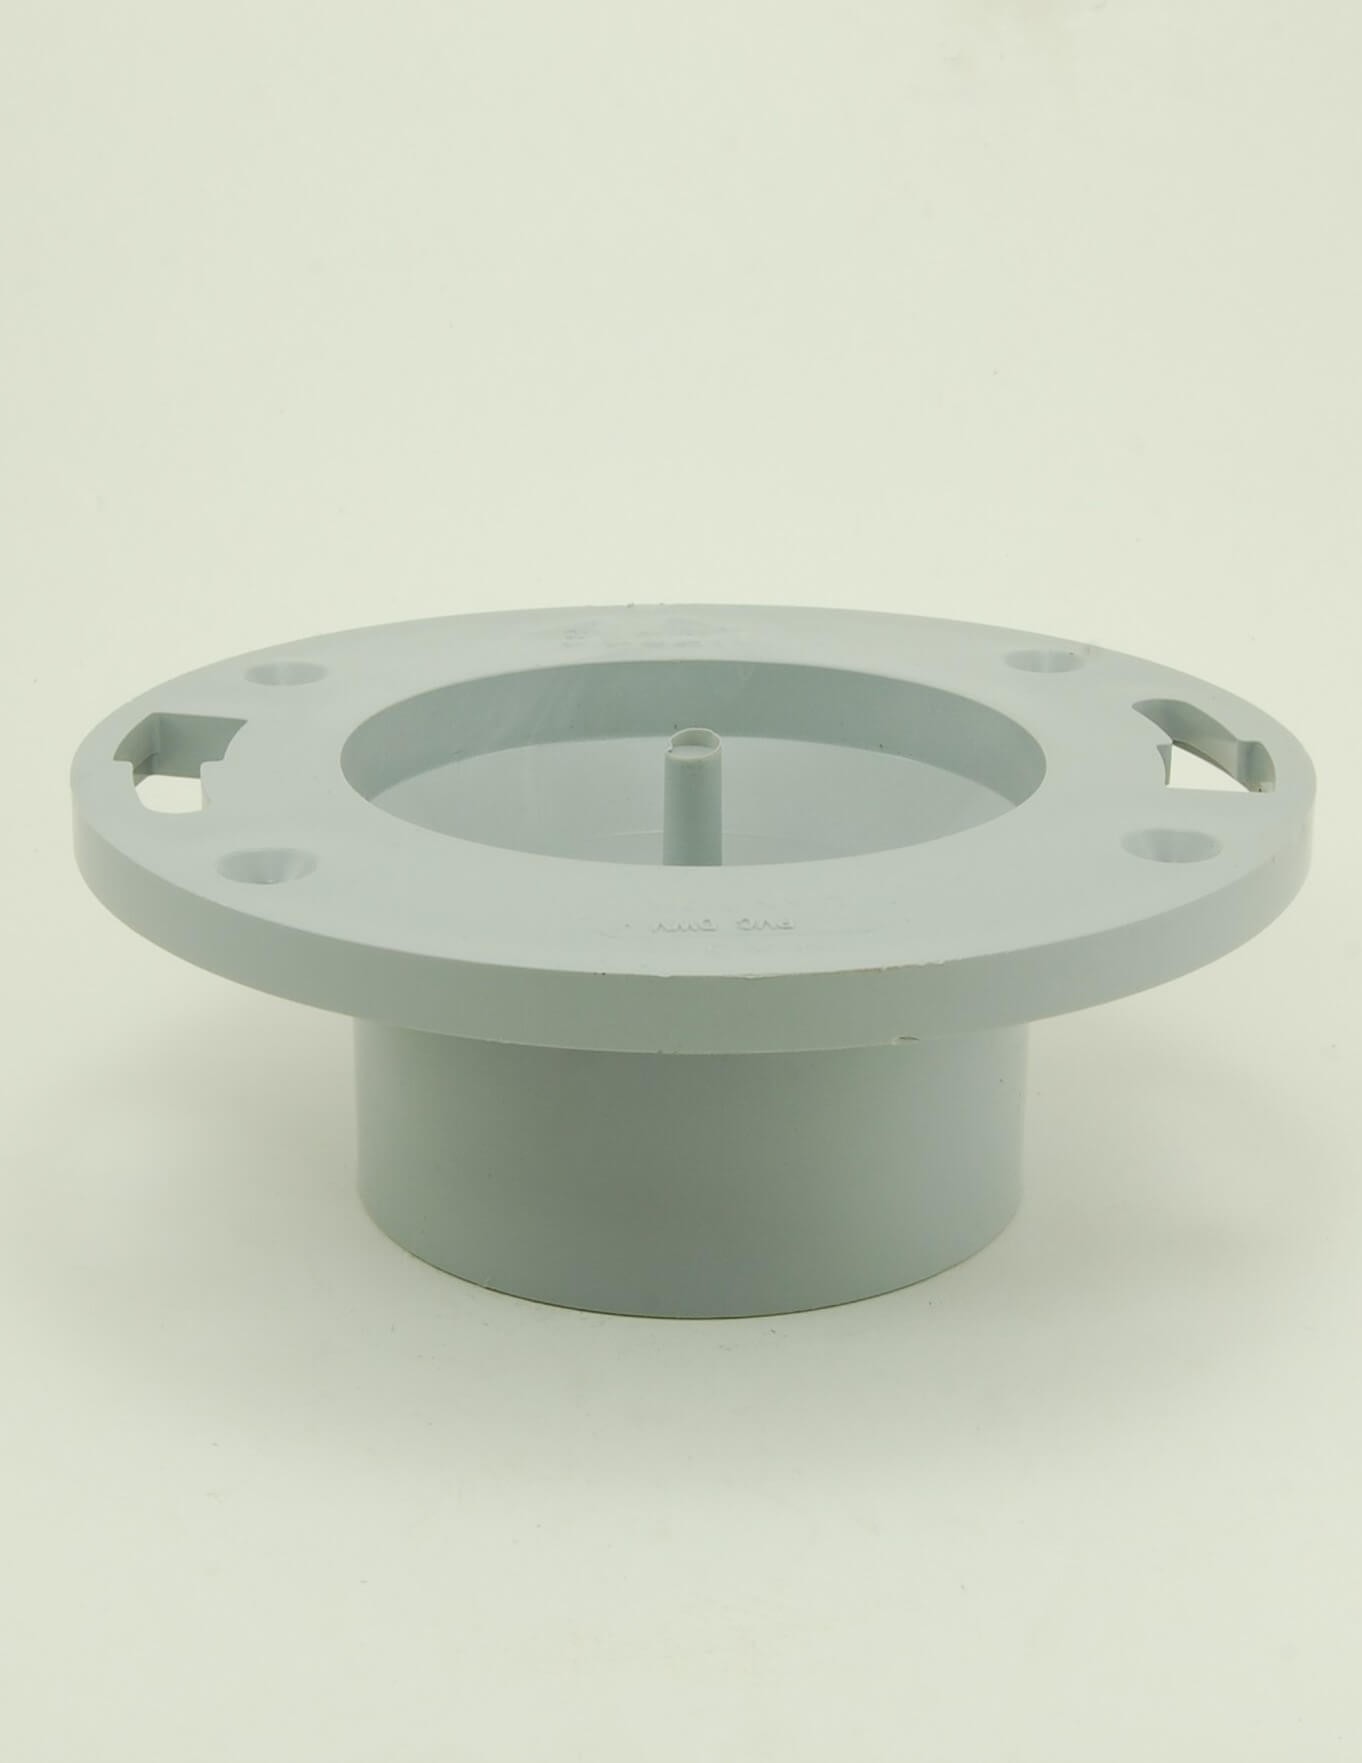 System 15 Closet Flange with Test Plate